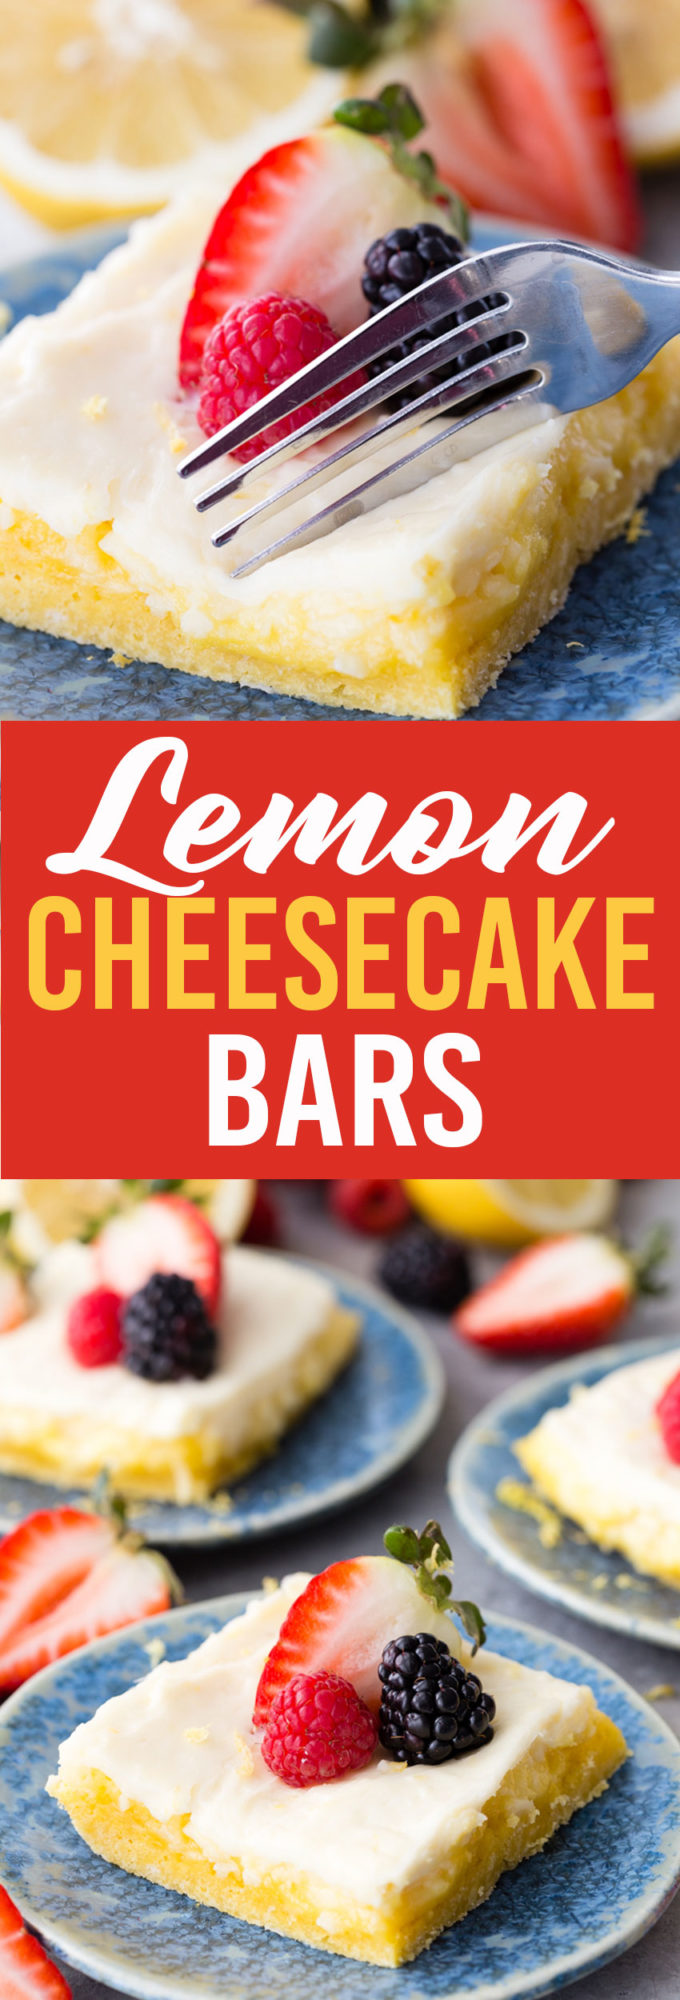 Easy lemon cheesecake bars that start with a boxed cake mix, but are better than the box. 